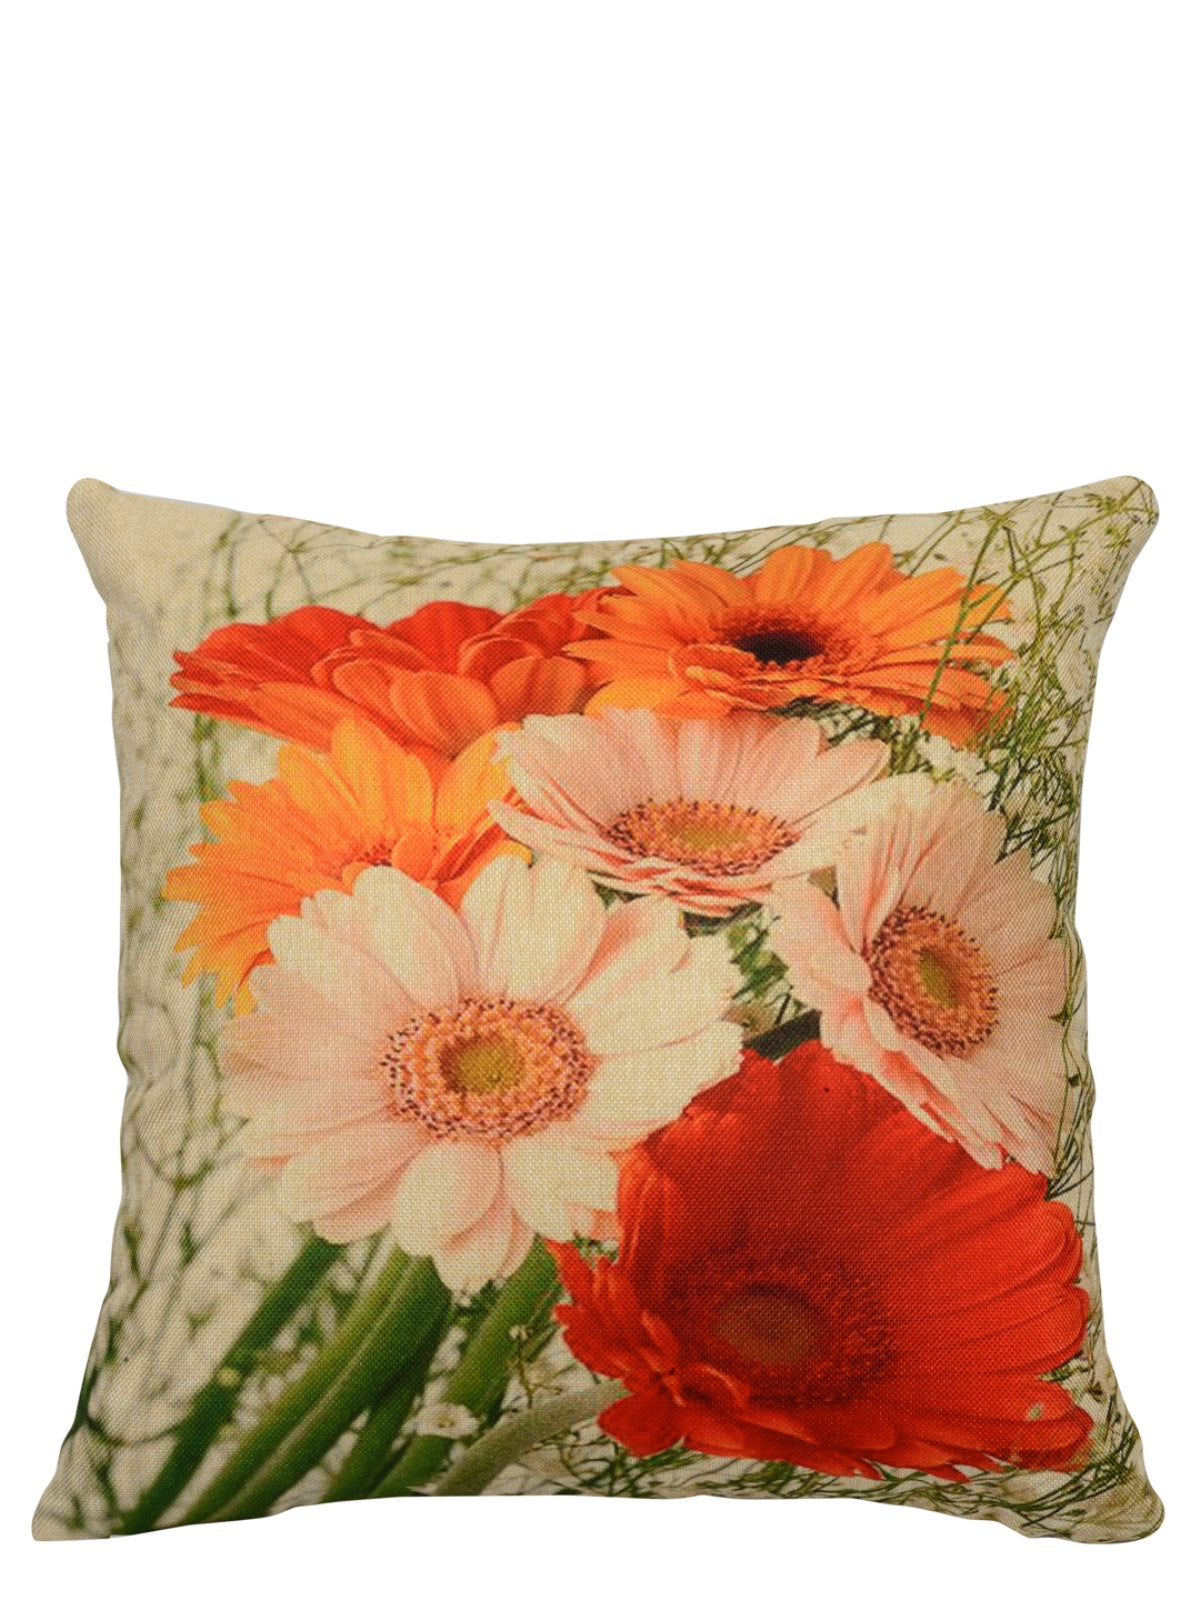 Soft Jute Floral Print Throw Pillow/Cushion Covers 16x16, Set of 5 - Multicolor